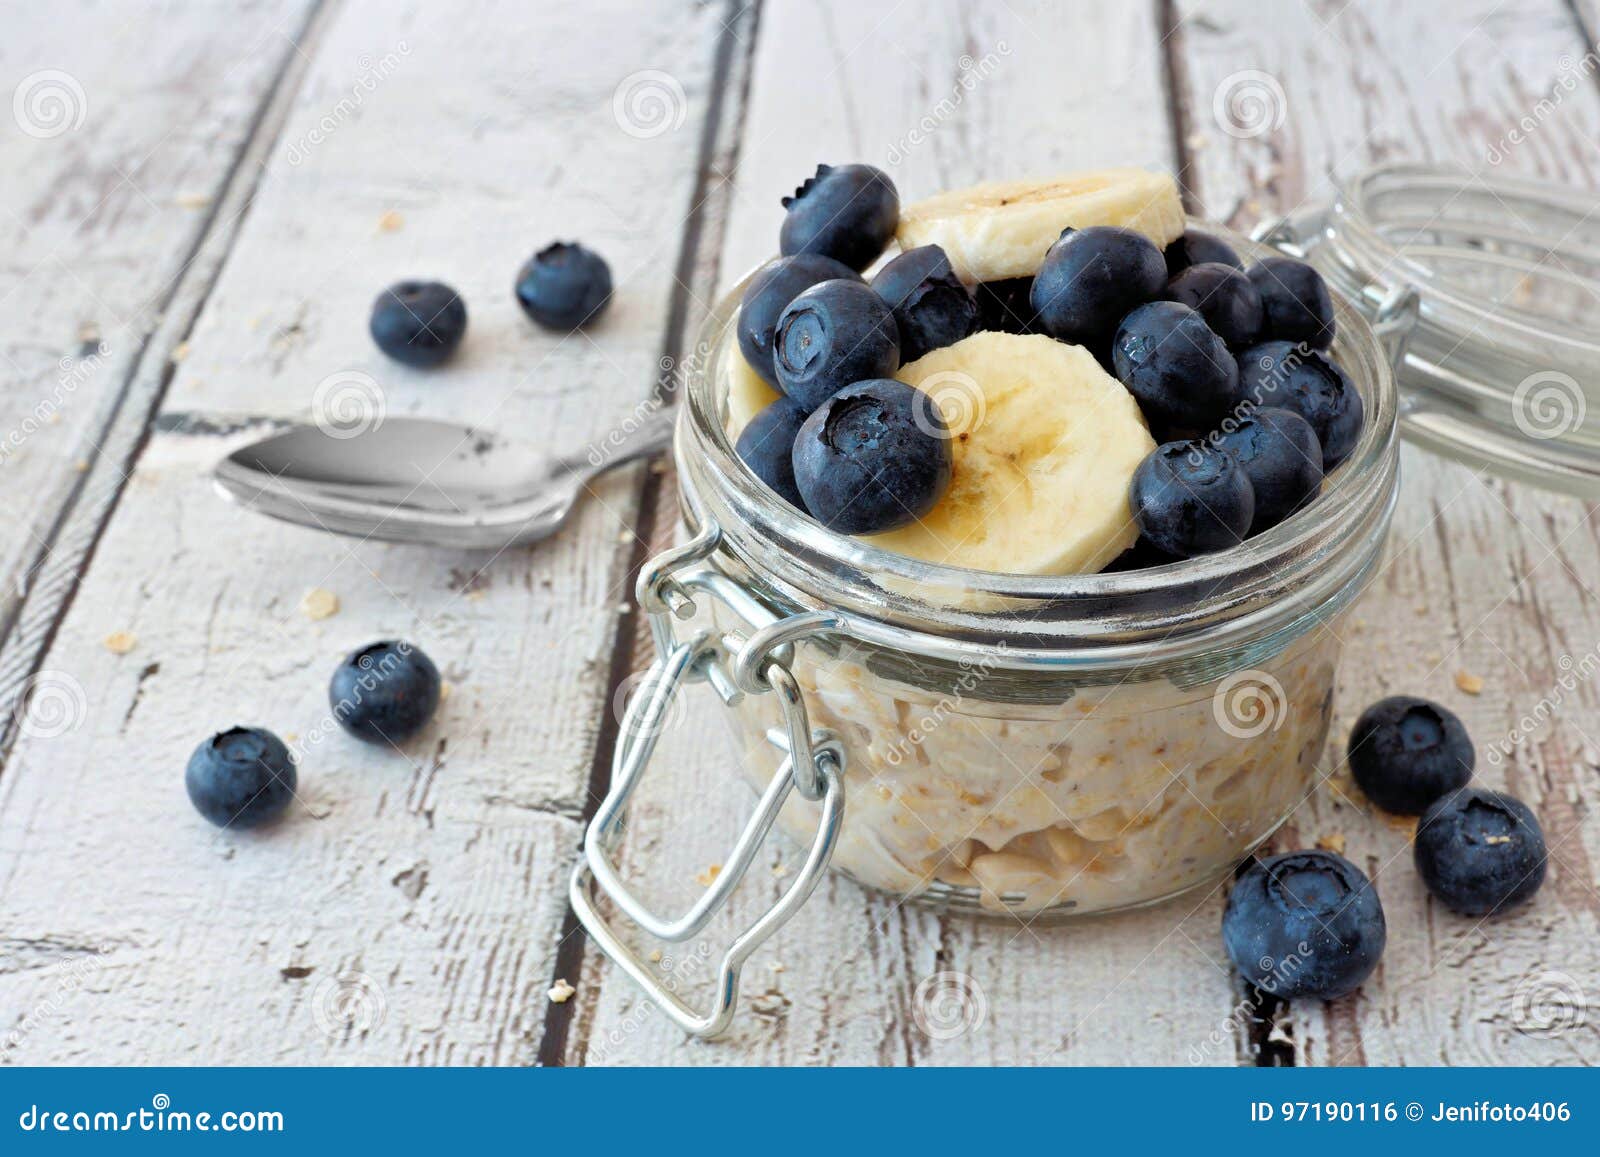 overnight oats with blueberries and bananas on a white wood background